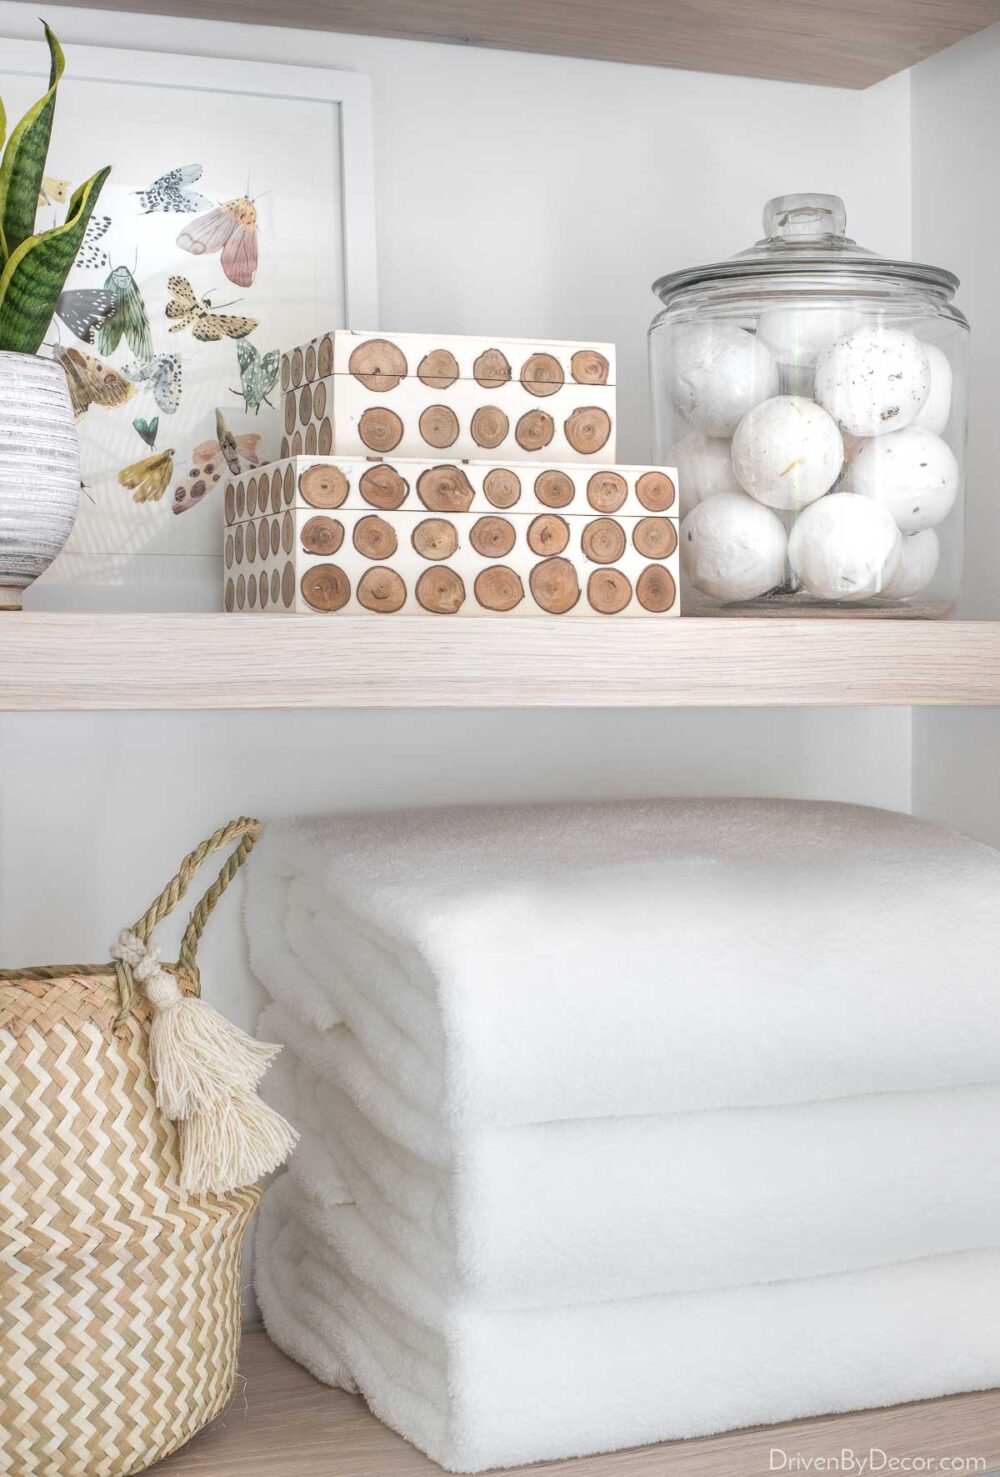 The best towels if you're looking for luxuriously soft, fluffy, and absorbent towels!